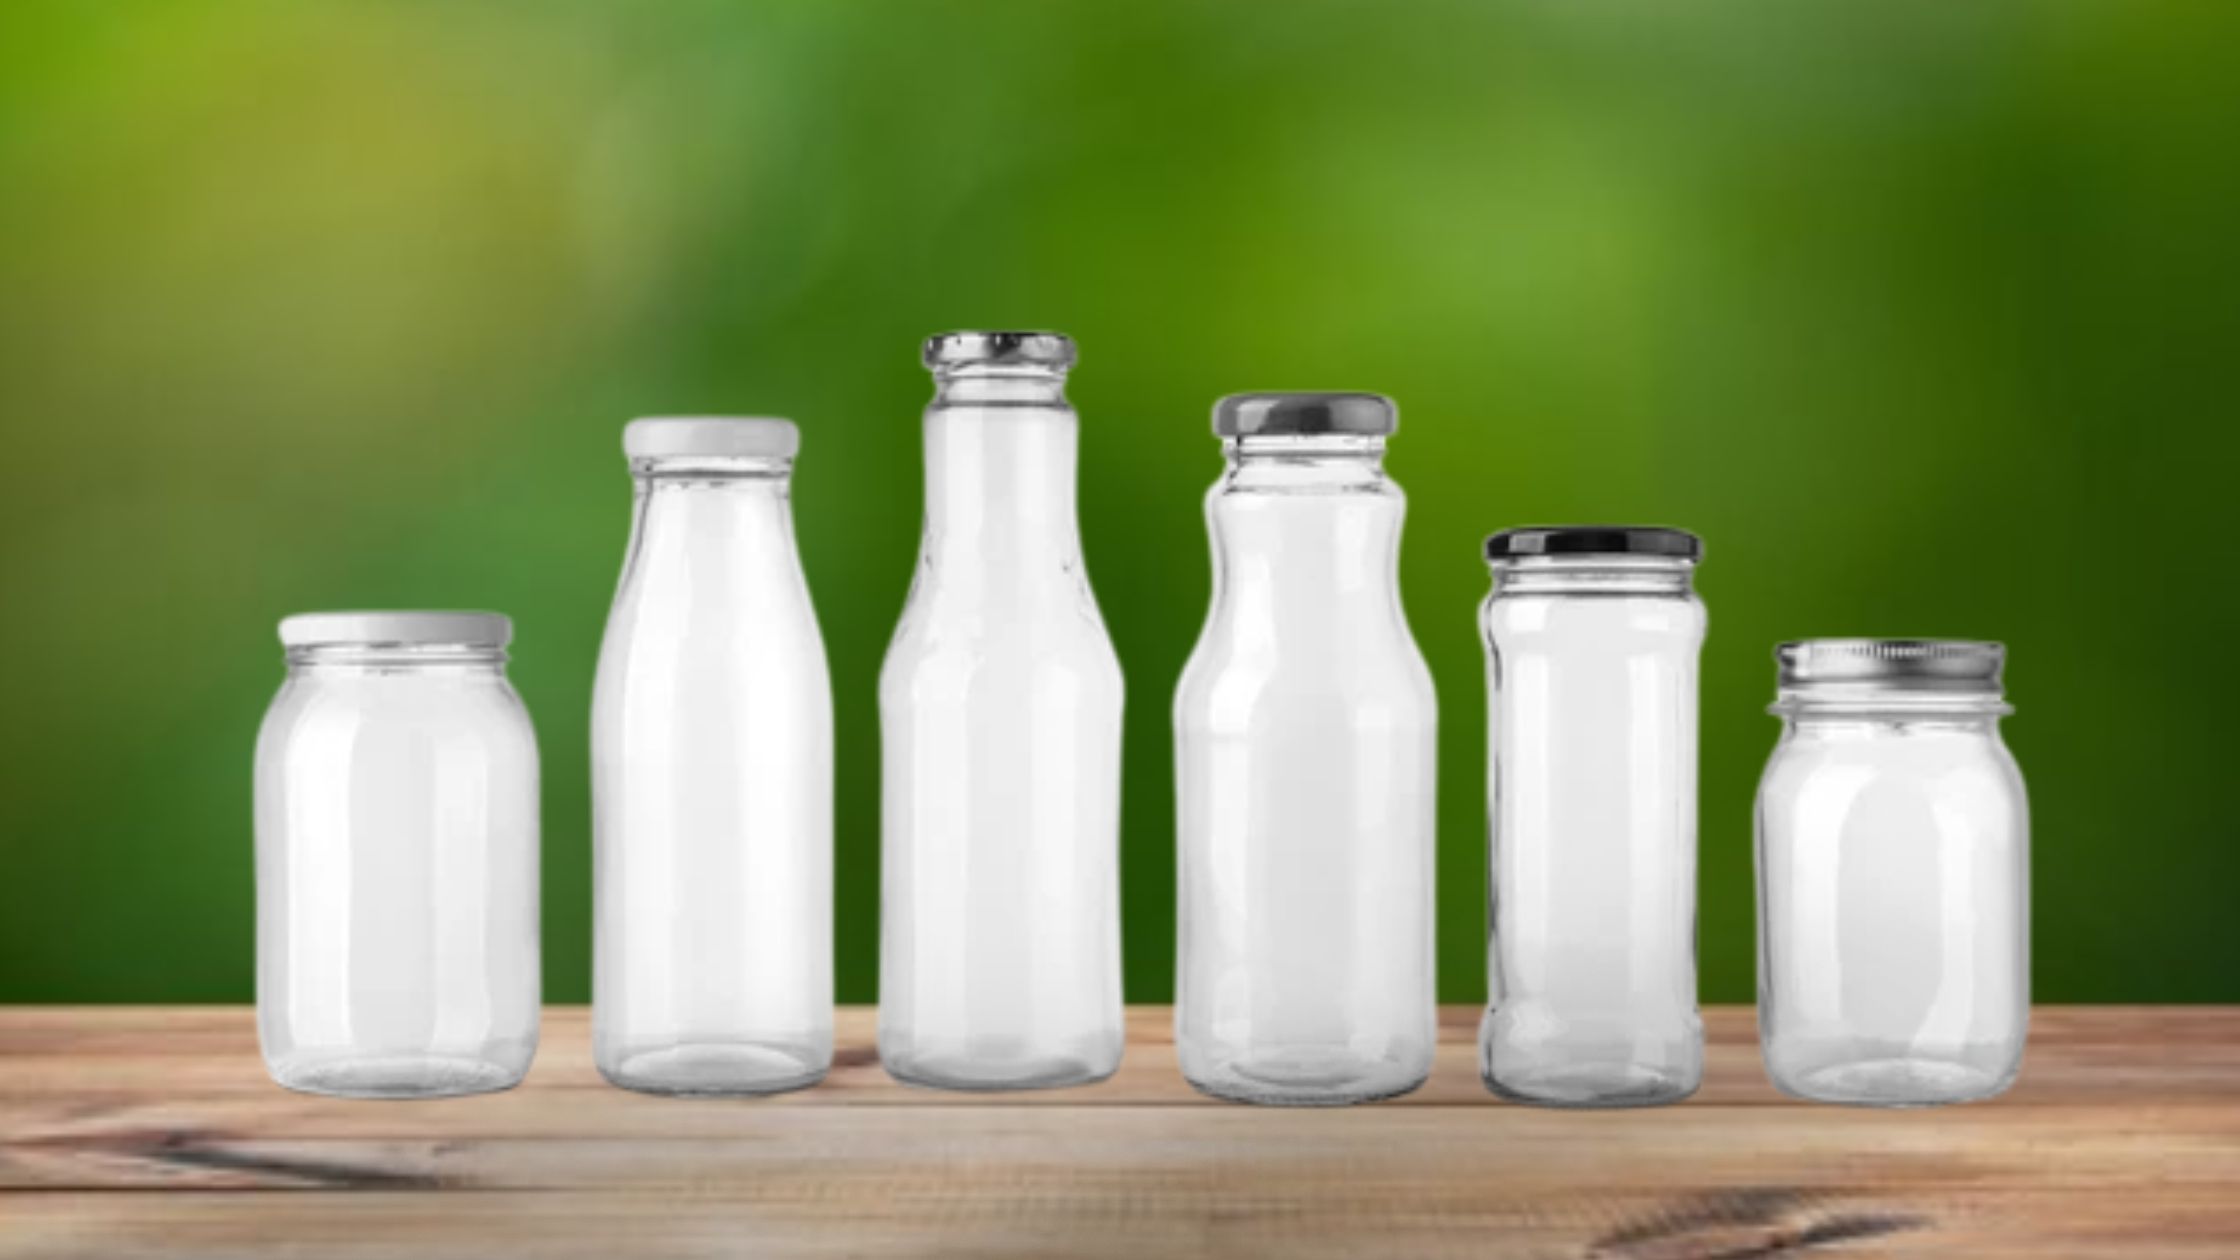 Some Design of Juice Glass Bottle Examples - Glass bottle